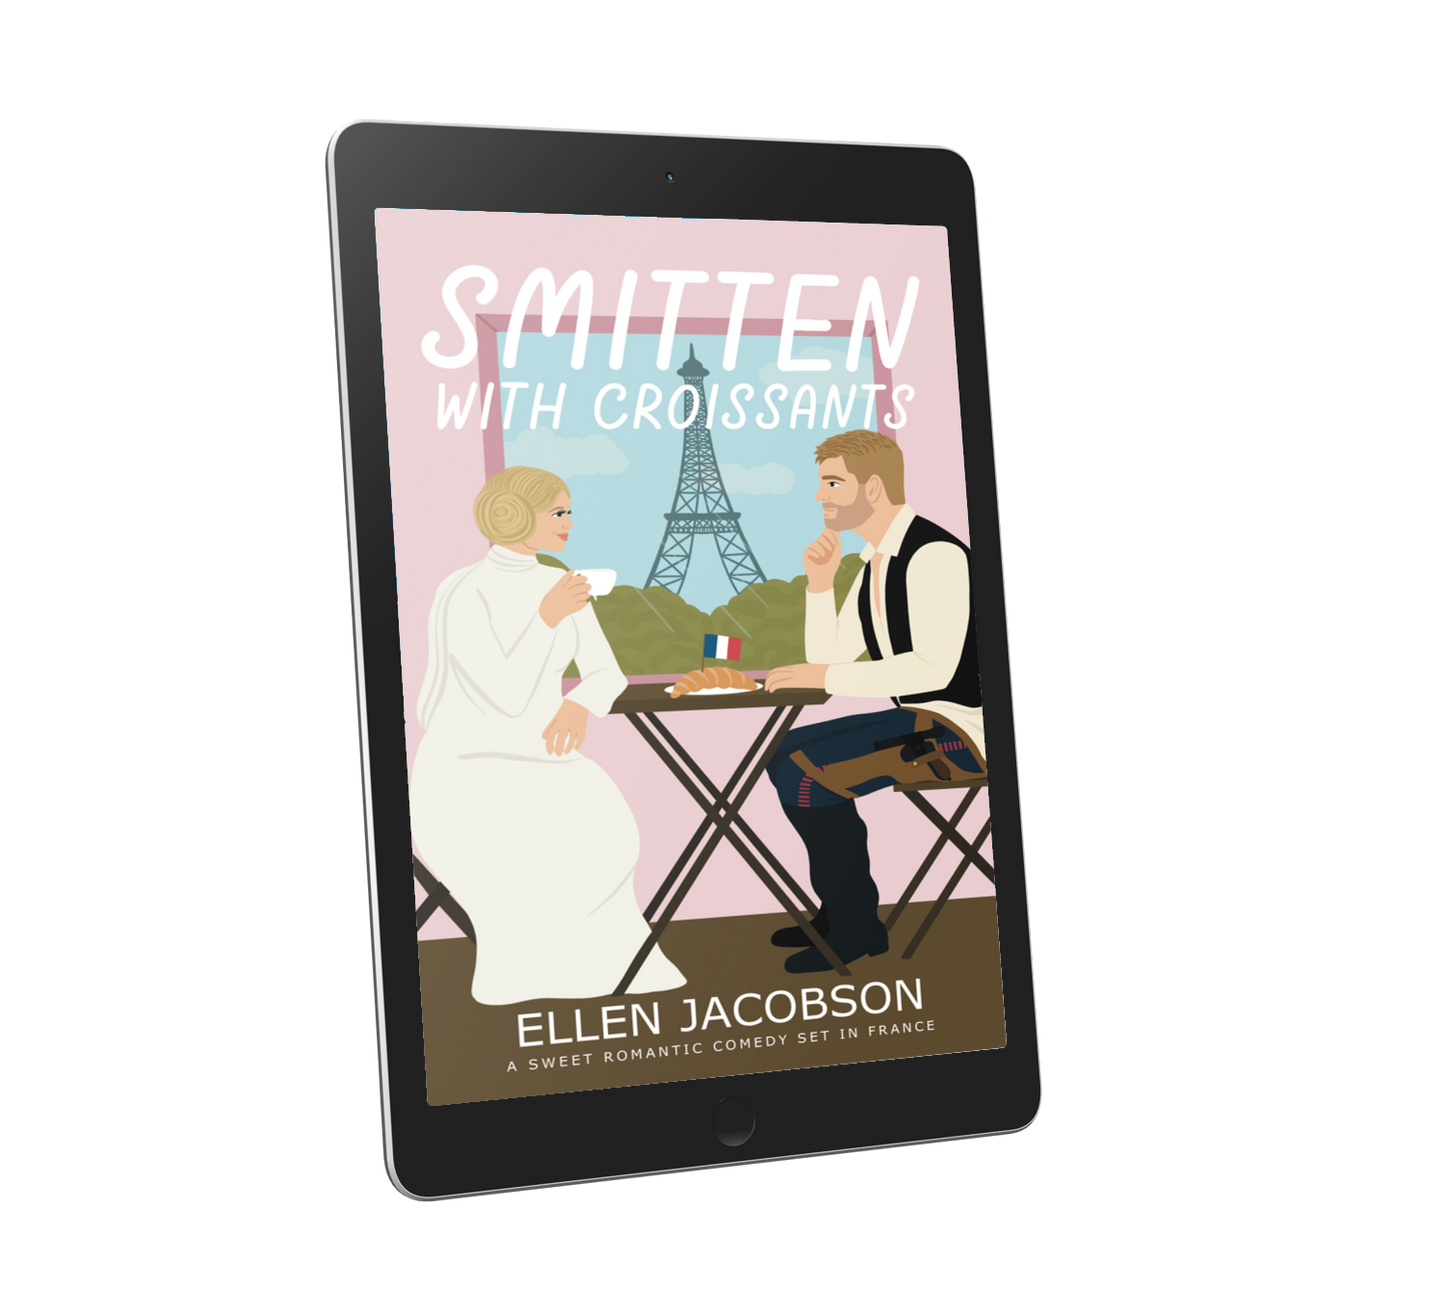 Smitten with Croissants romantic comedy set in France ebook cover showing woman wearing Princess Leia outfit and man wearing Han Solo outfit